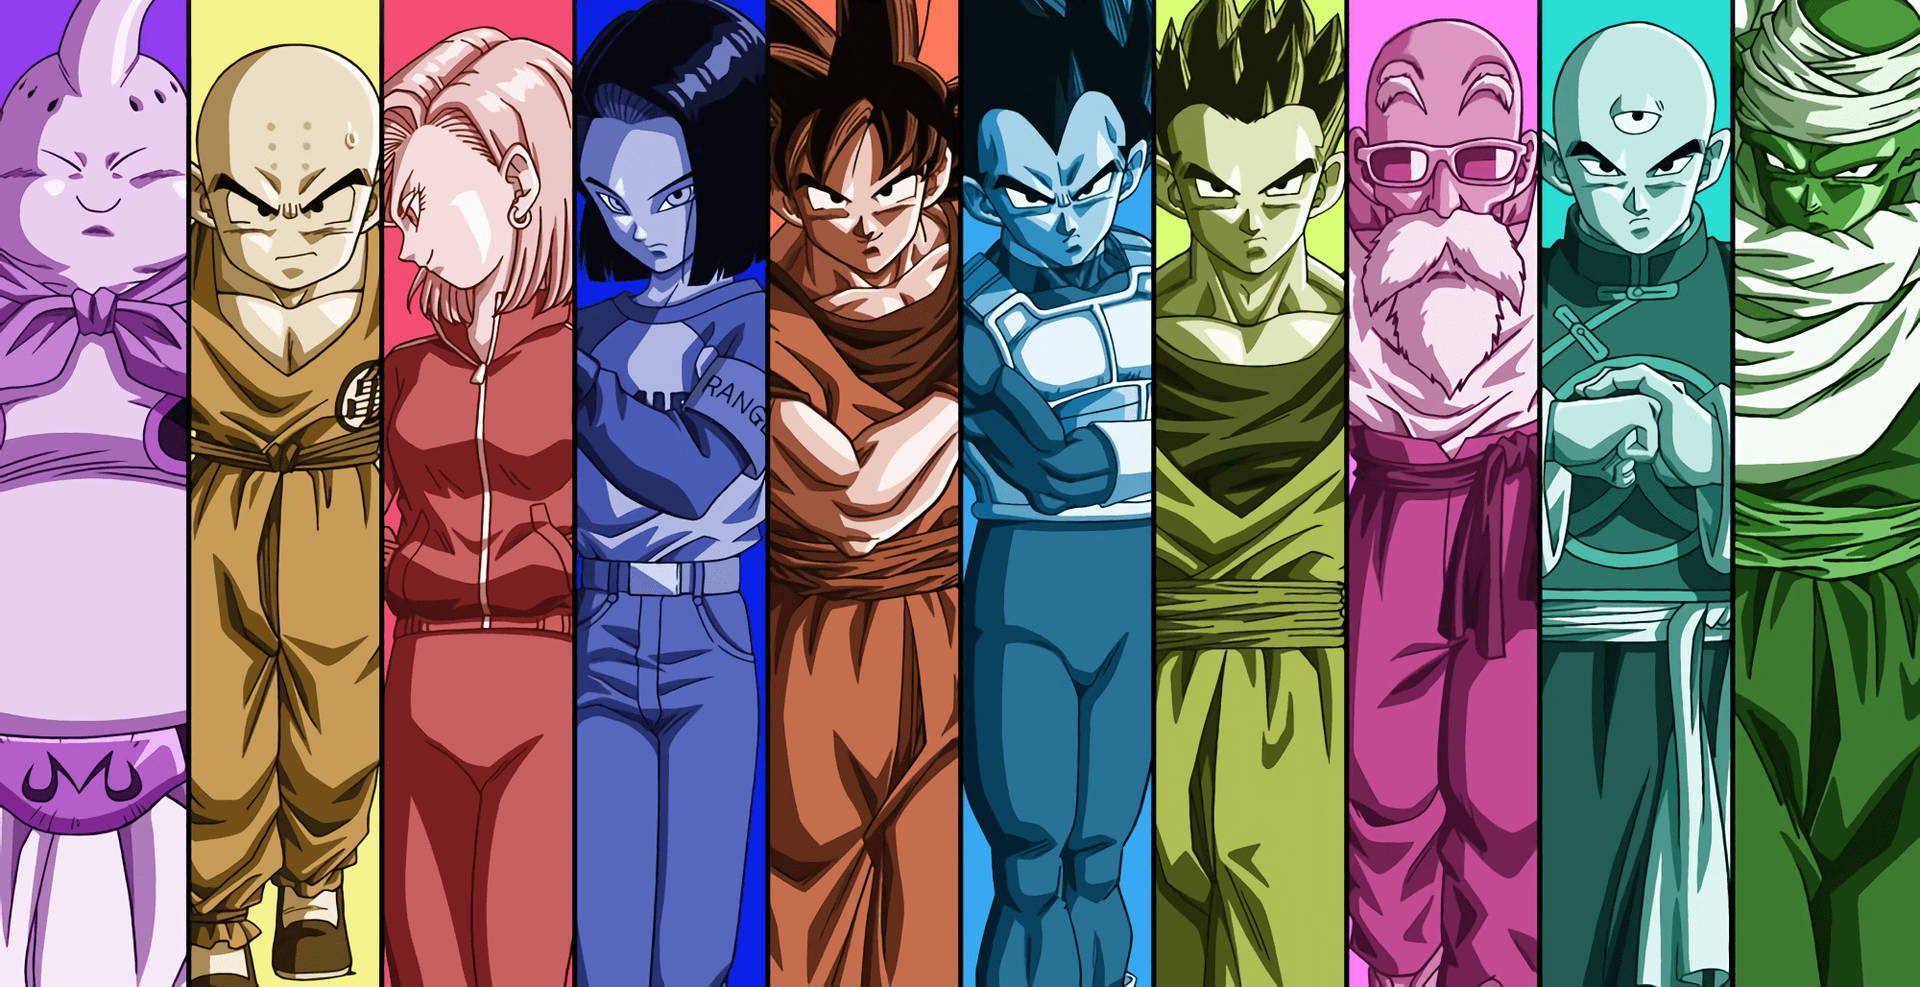 Gather around for an action-packed adventure with the iconic characters of Dragon Ball Wallpaper